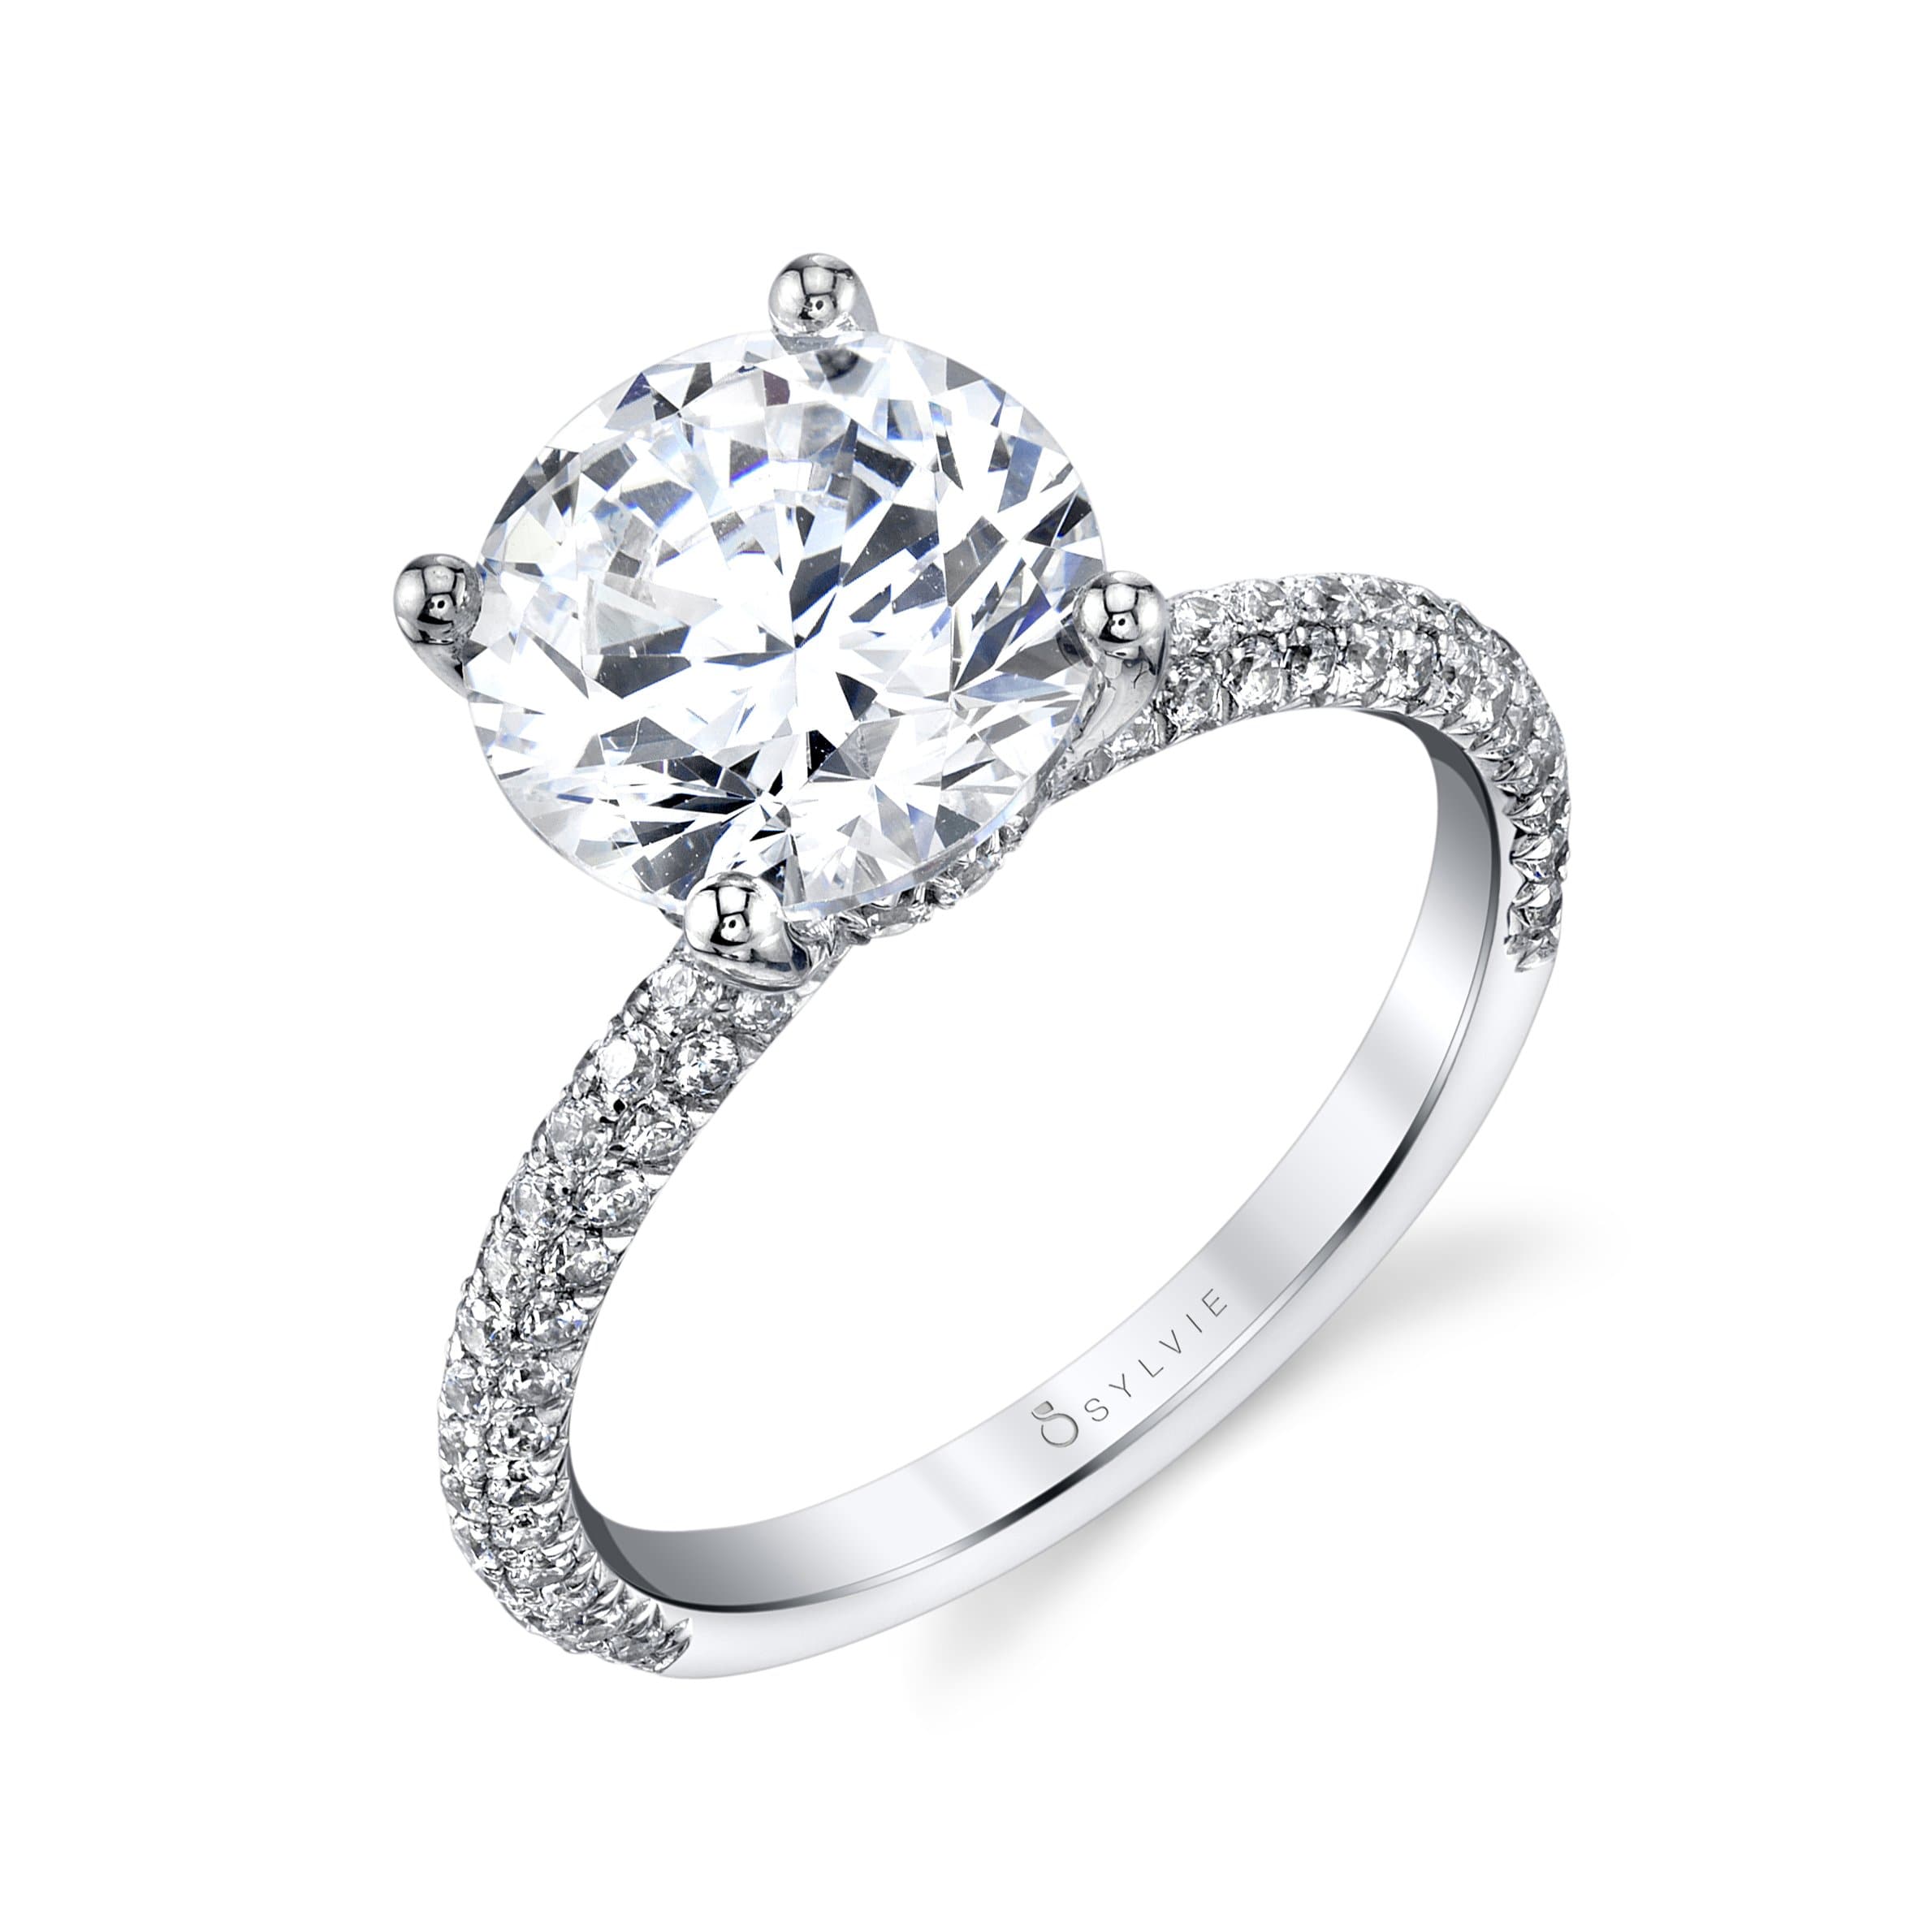 Baguette Engagement Ring with Round Diamond | The Diamond Guys